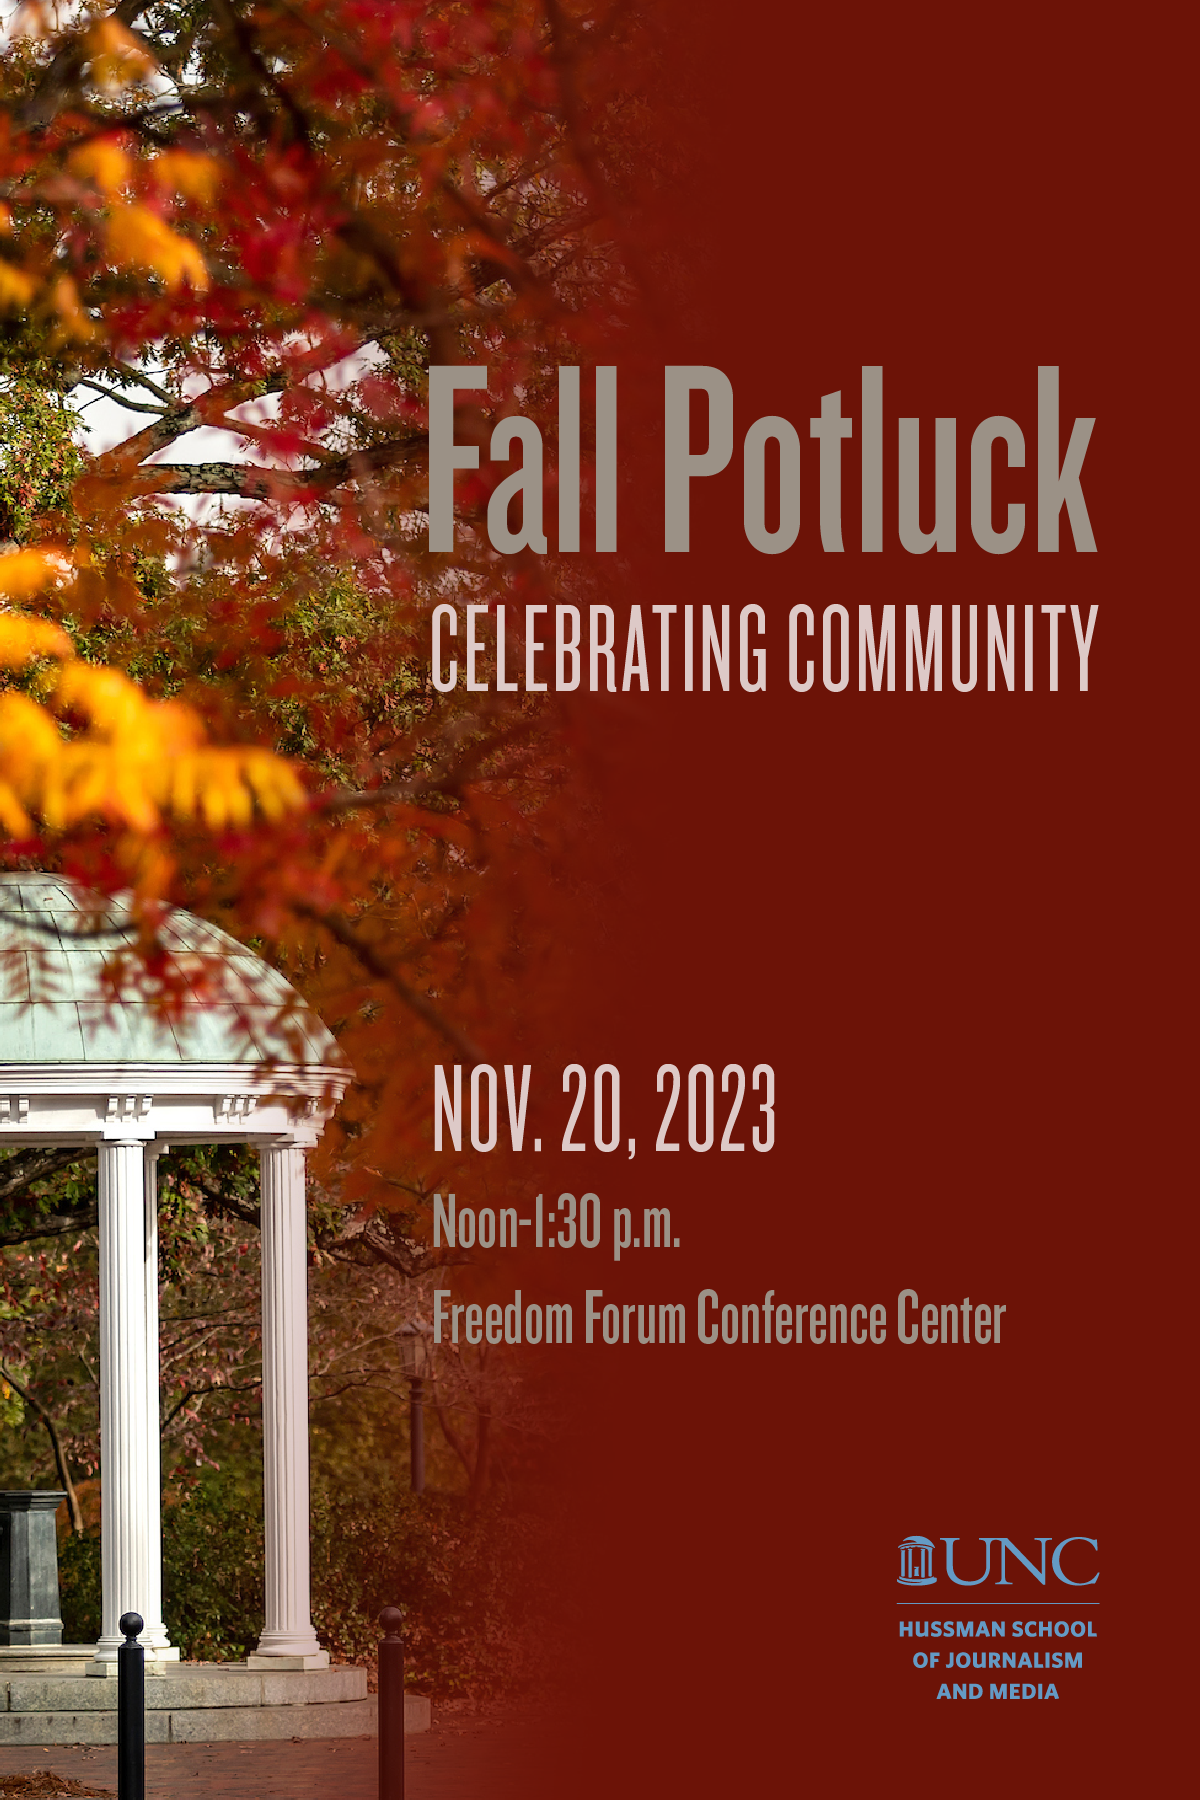 Flyer for Fall Potluck celebrating community, November 20, 2023 from noon to 1:30pm at the Freedom Forum Conference Center. 